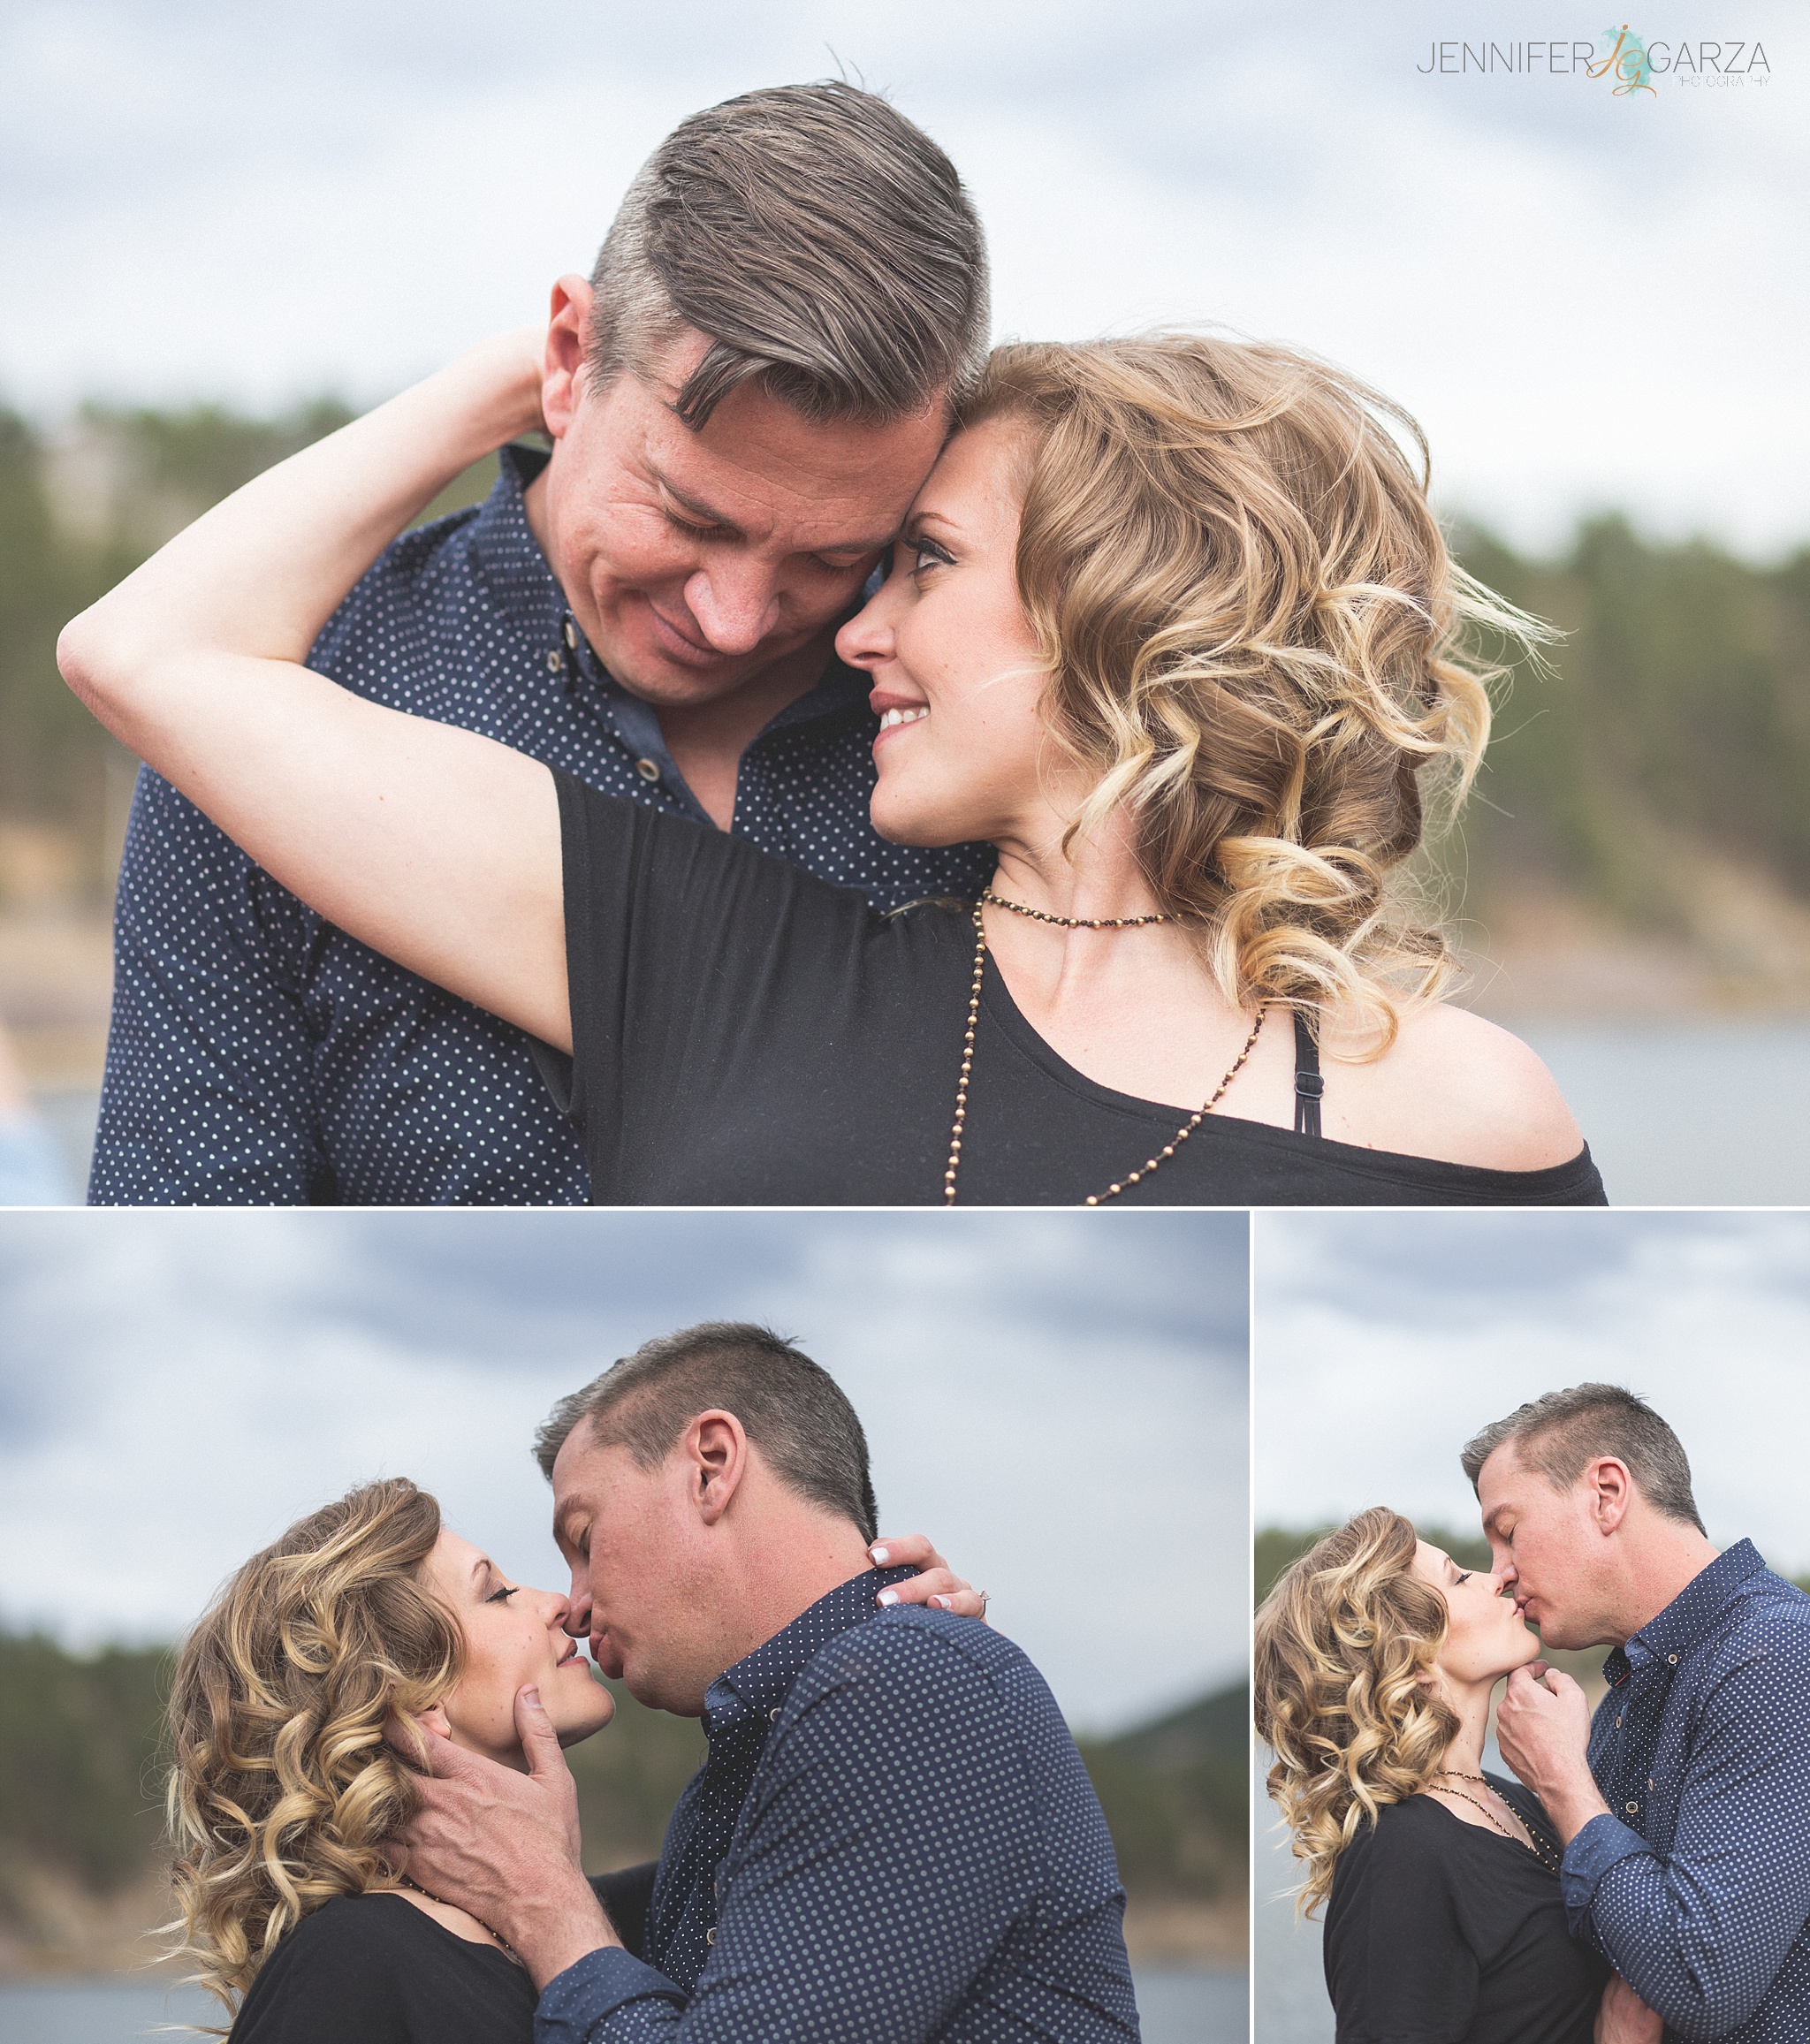 Whitney & Chris were such an amazing couple during their Epic Engagement Shoot at Evergreen Lake House.